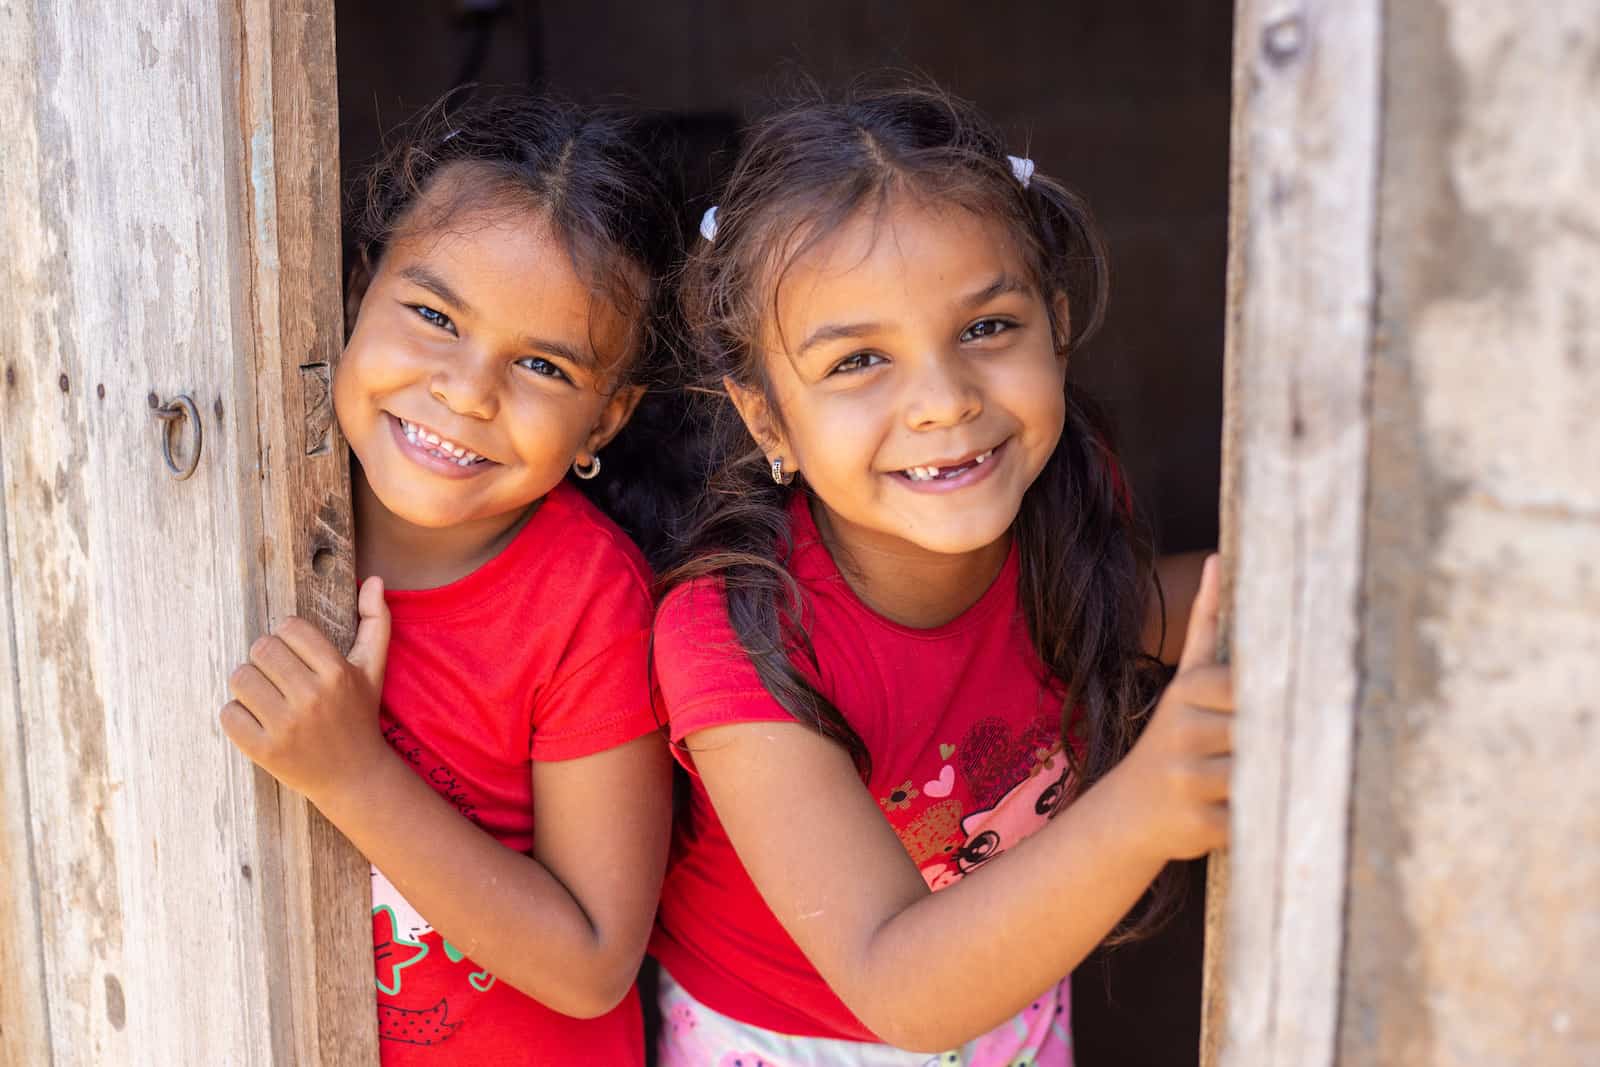 Two girls in red peek out of a door, smiling